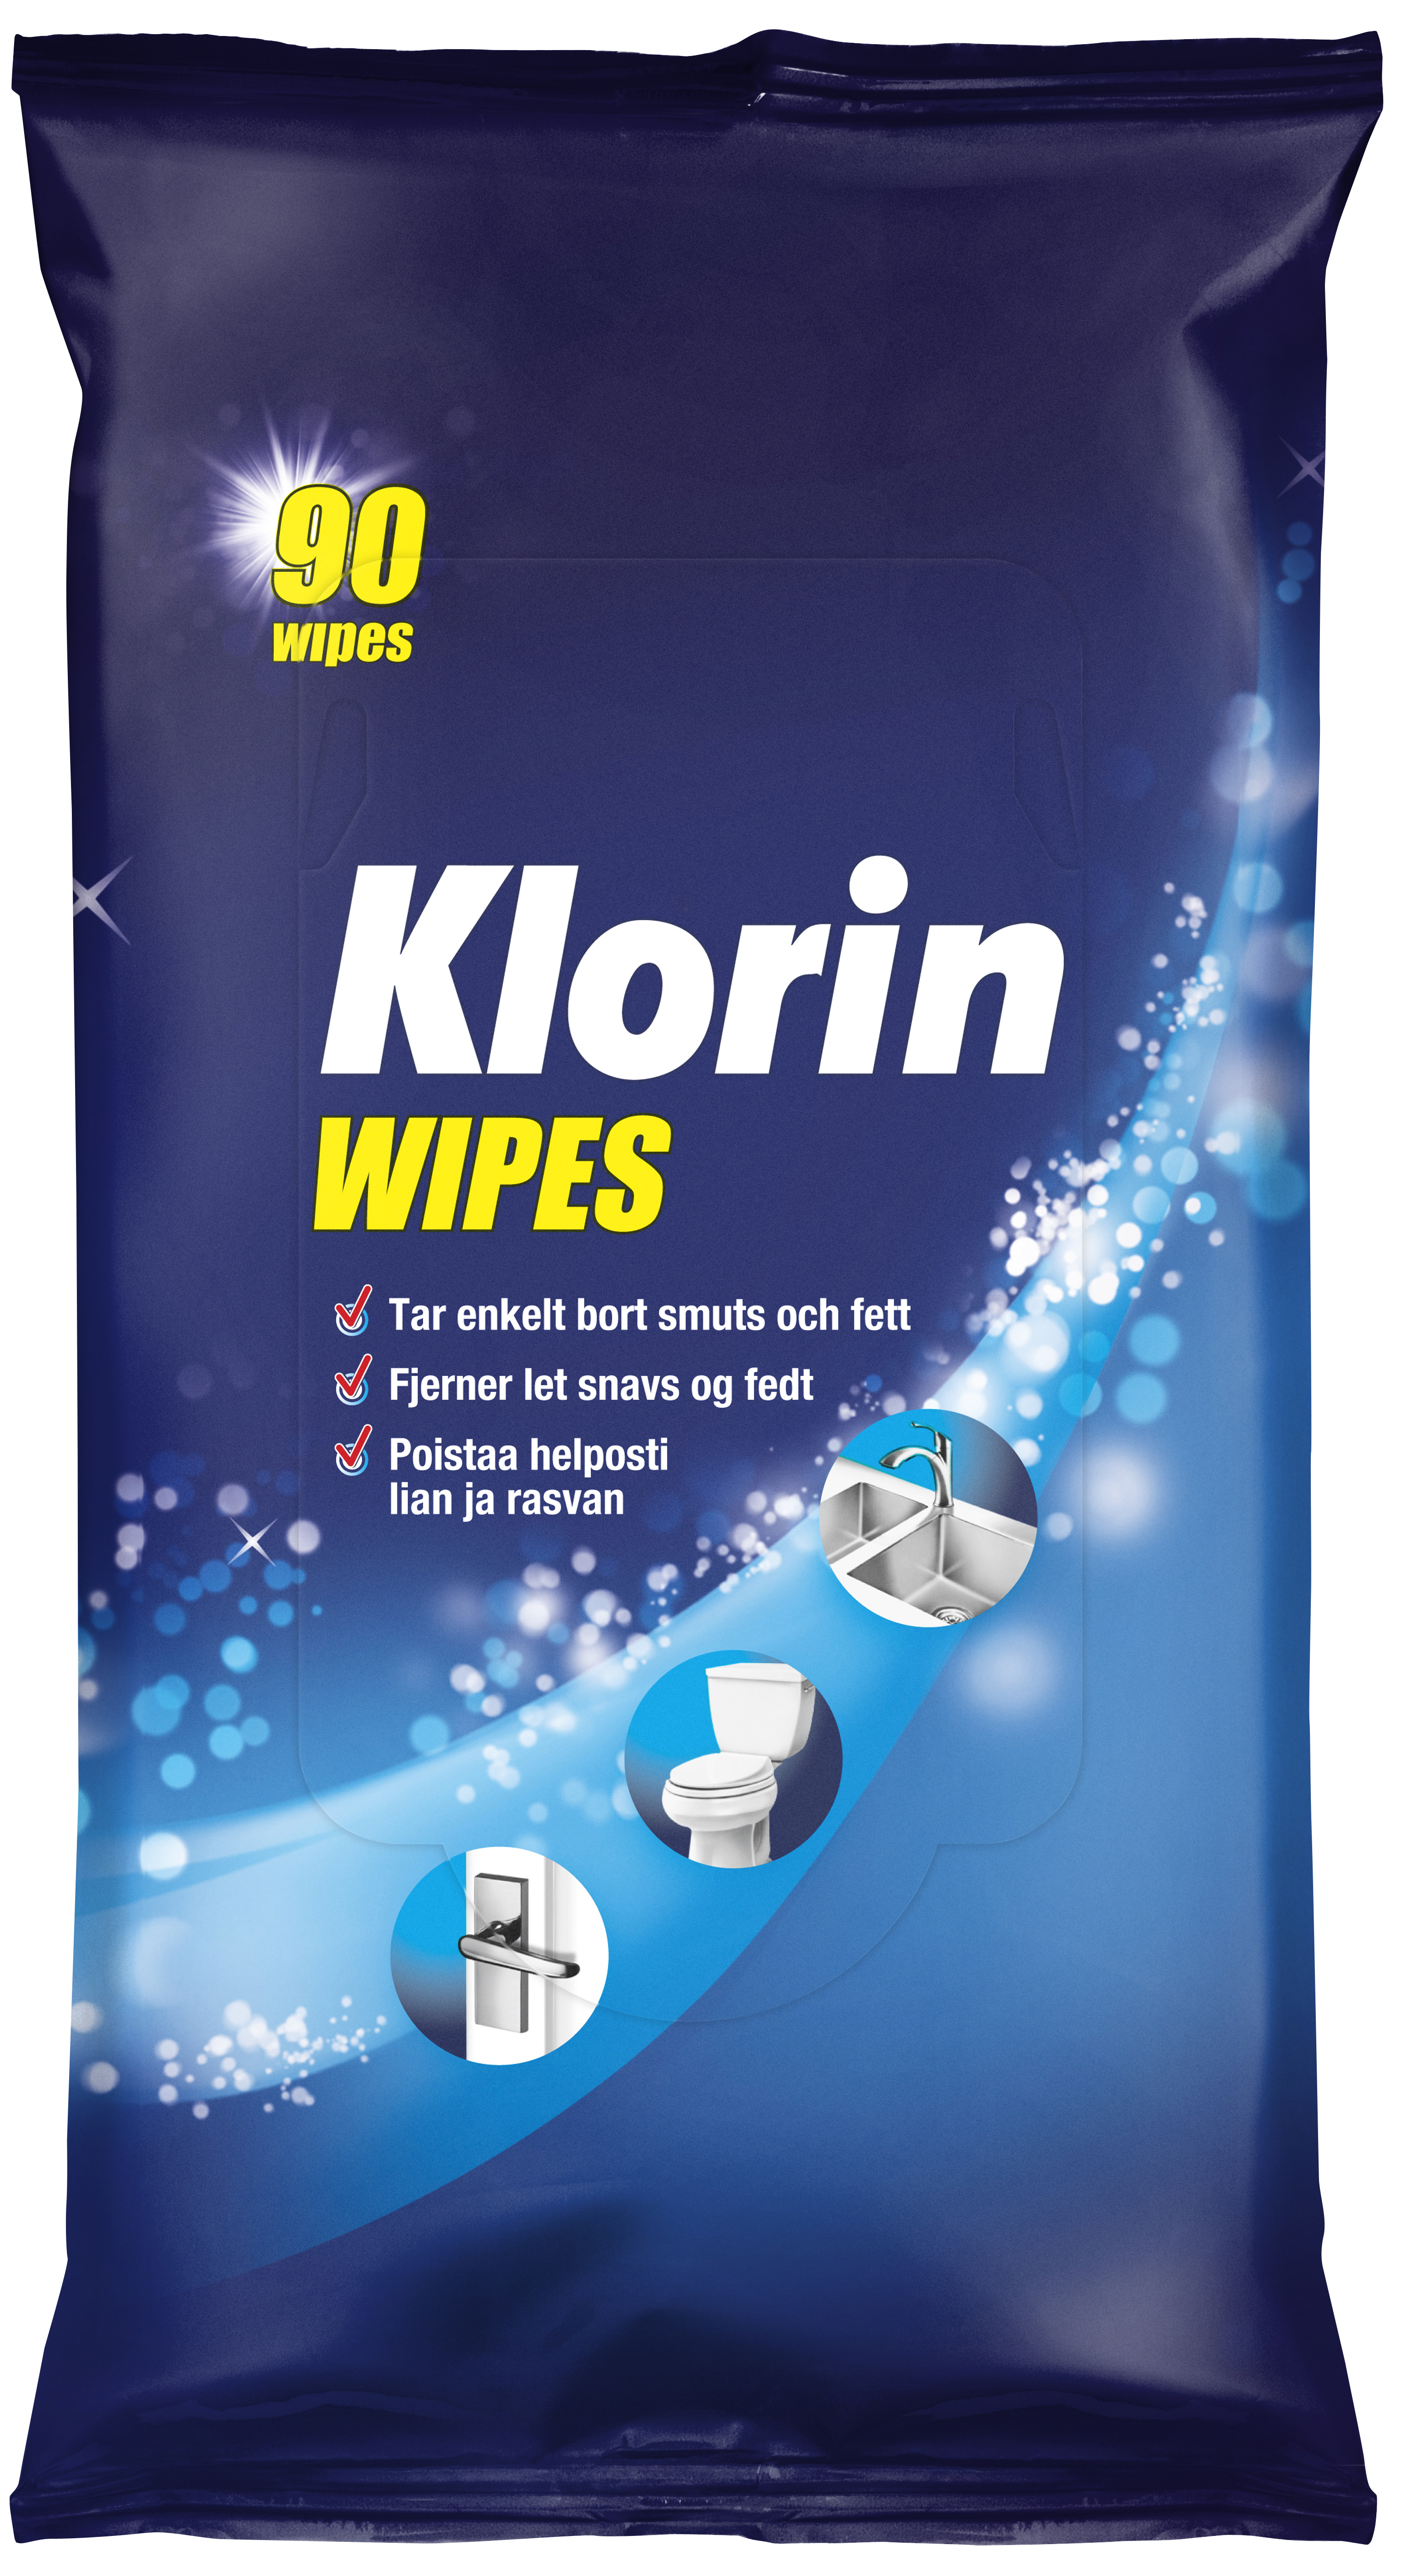 Klorin Wipes 90 st